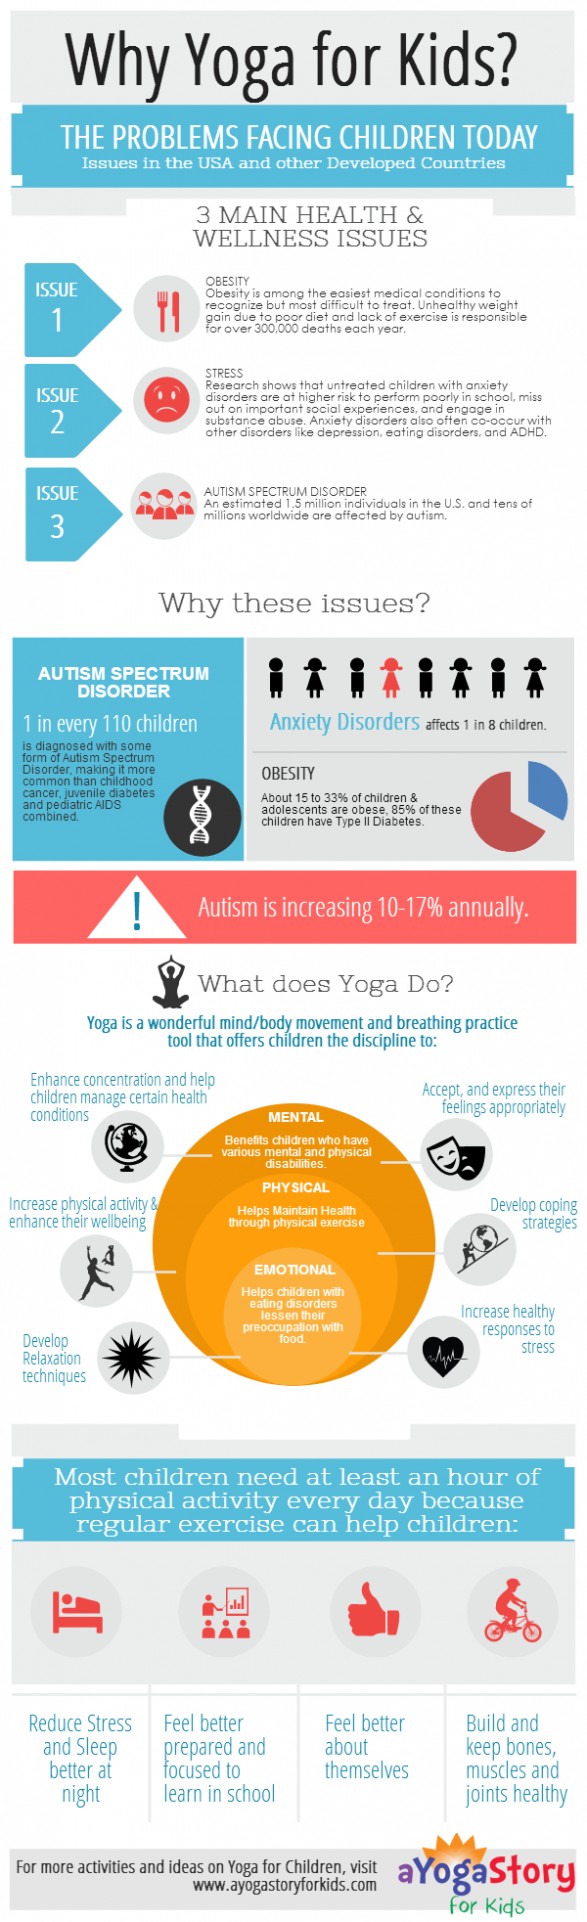 Credit: Why Yoga For Kids? by A Yoga Story For Kids